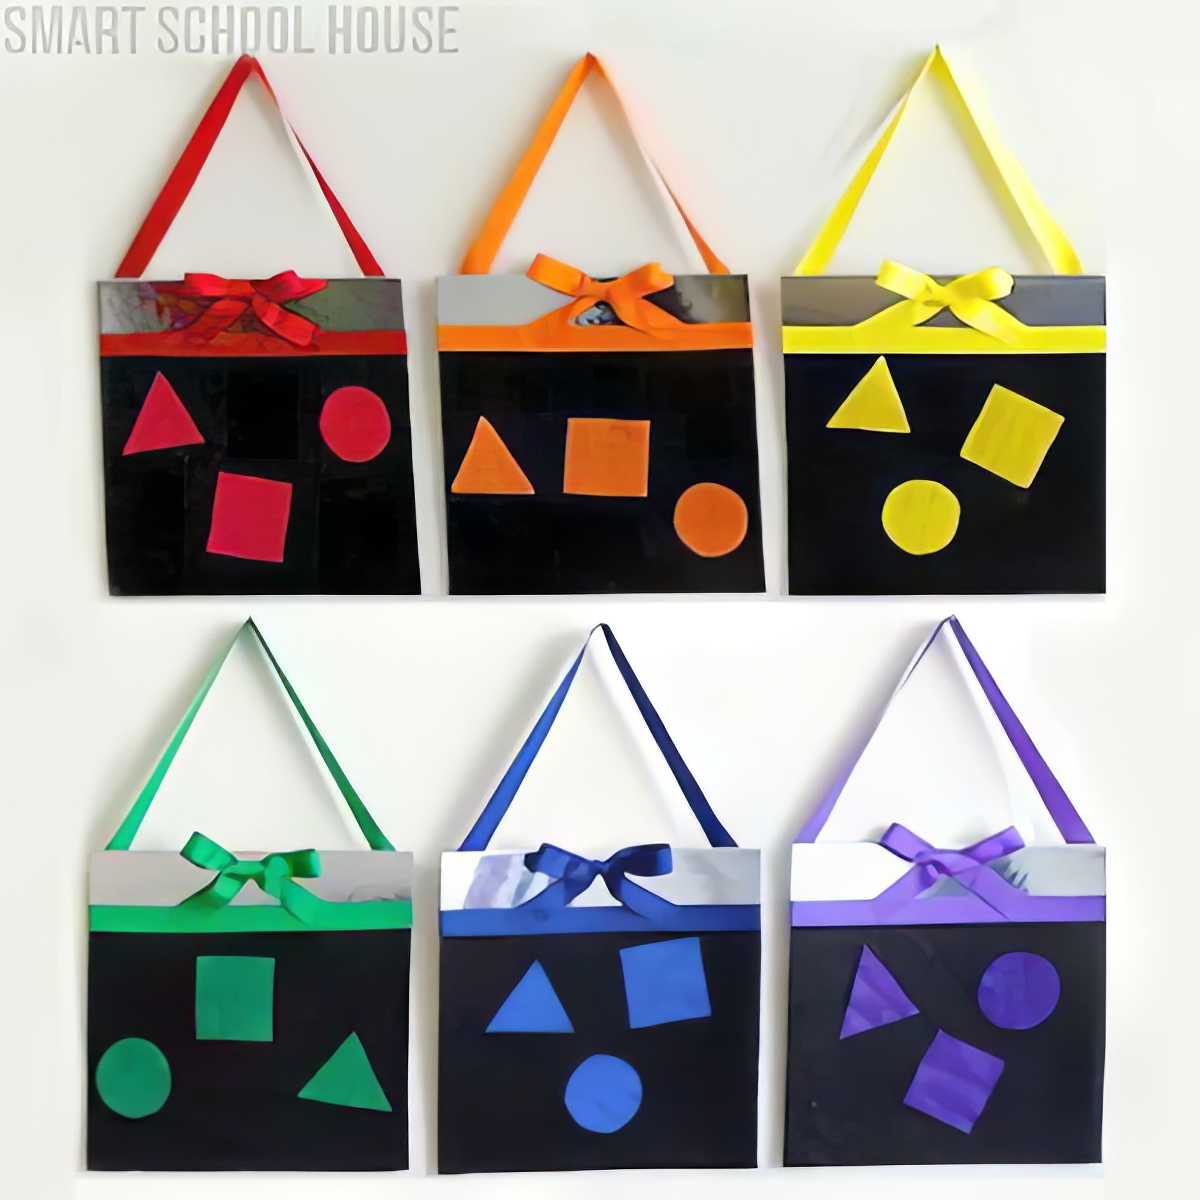 Smart School House, Bright and Colorful Activities for Preschoolers